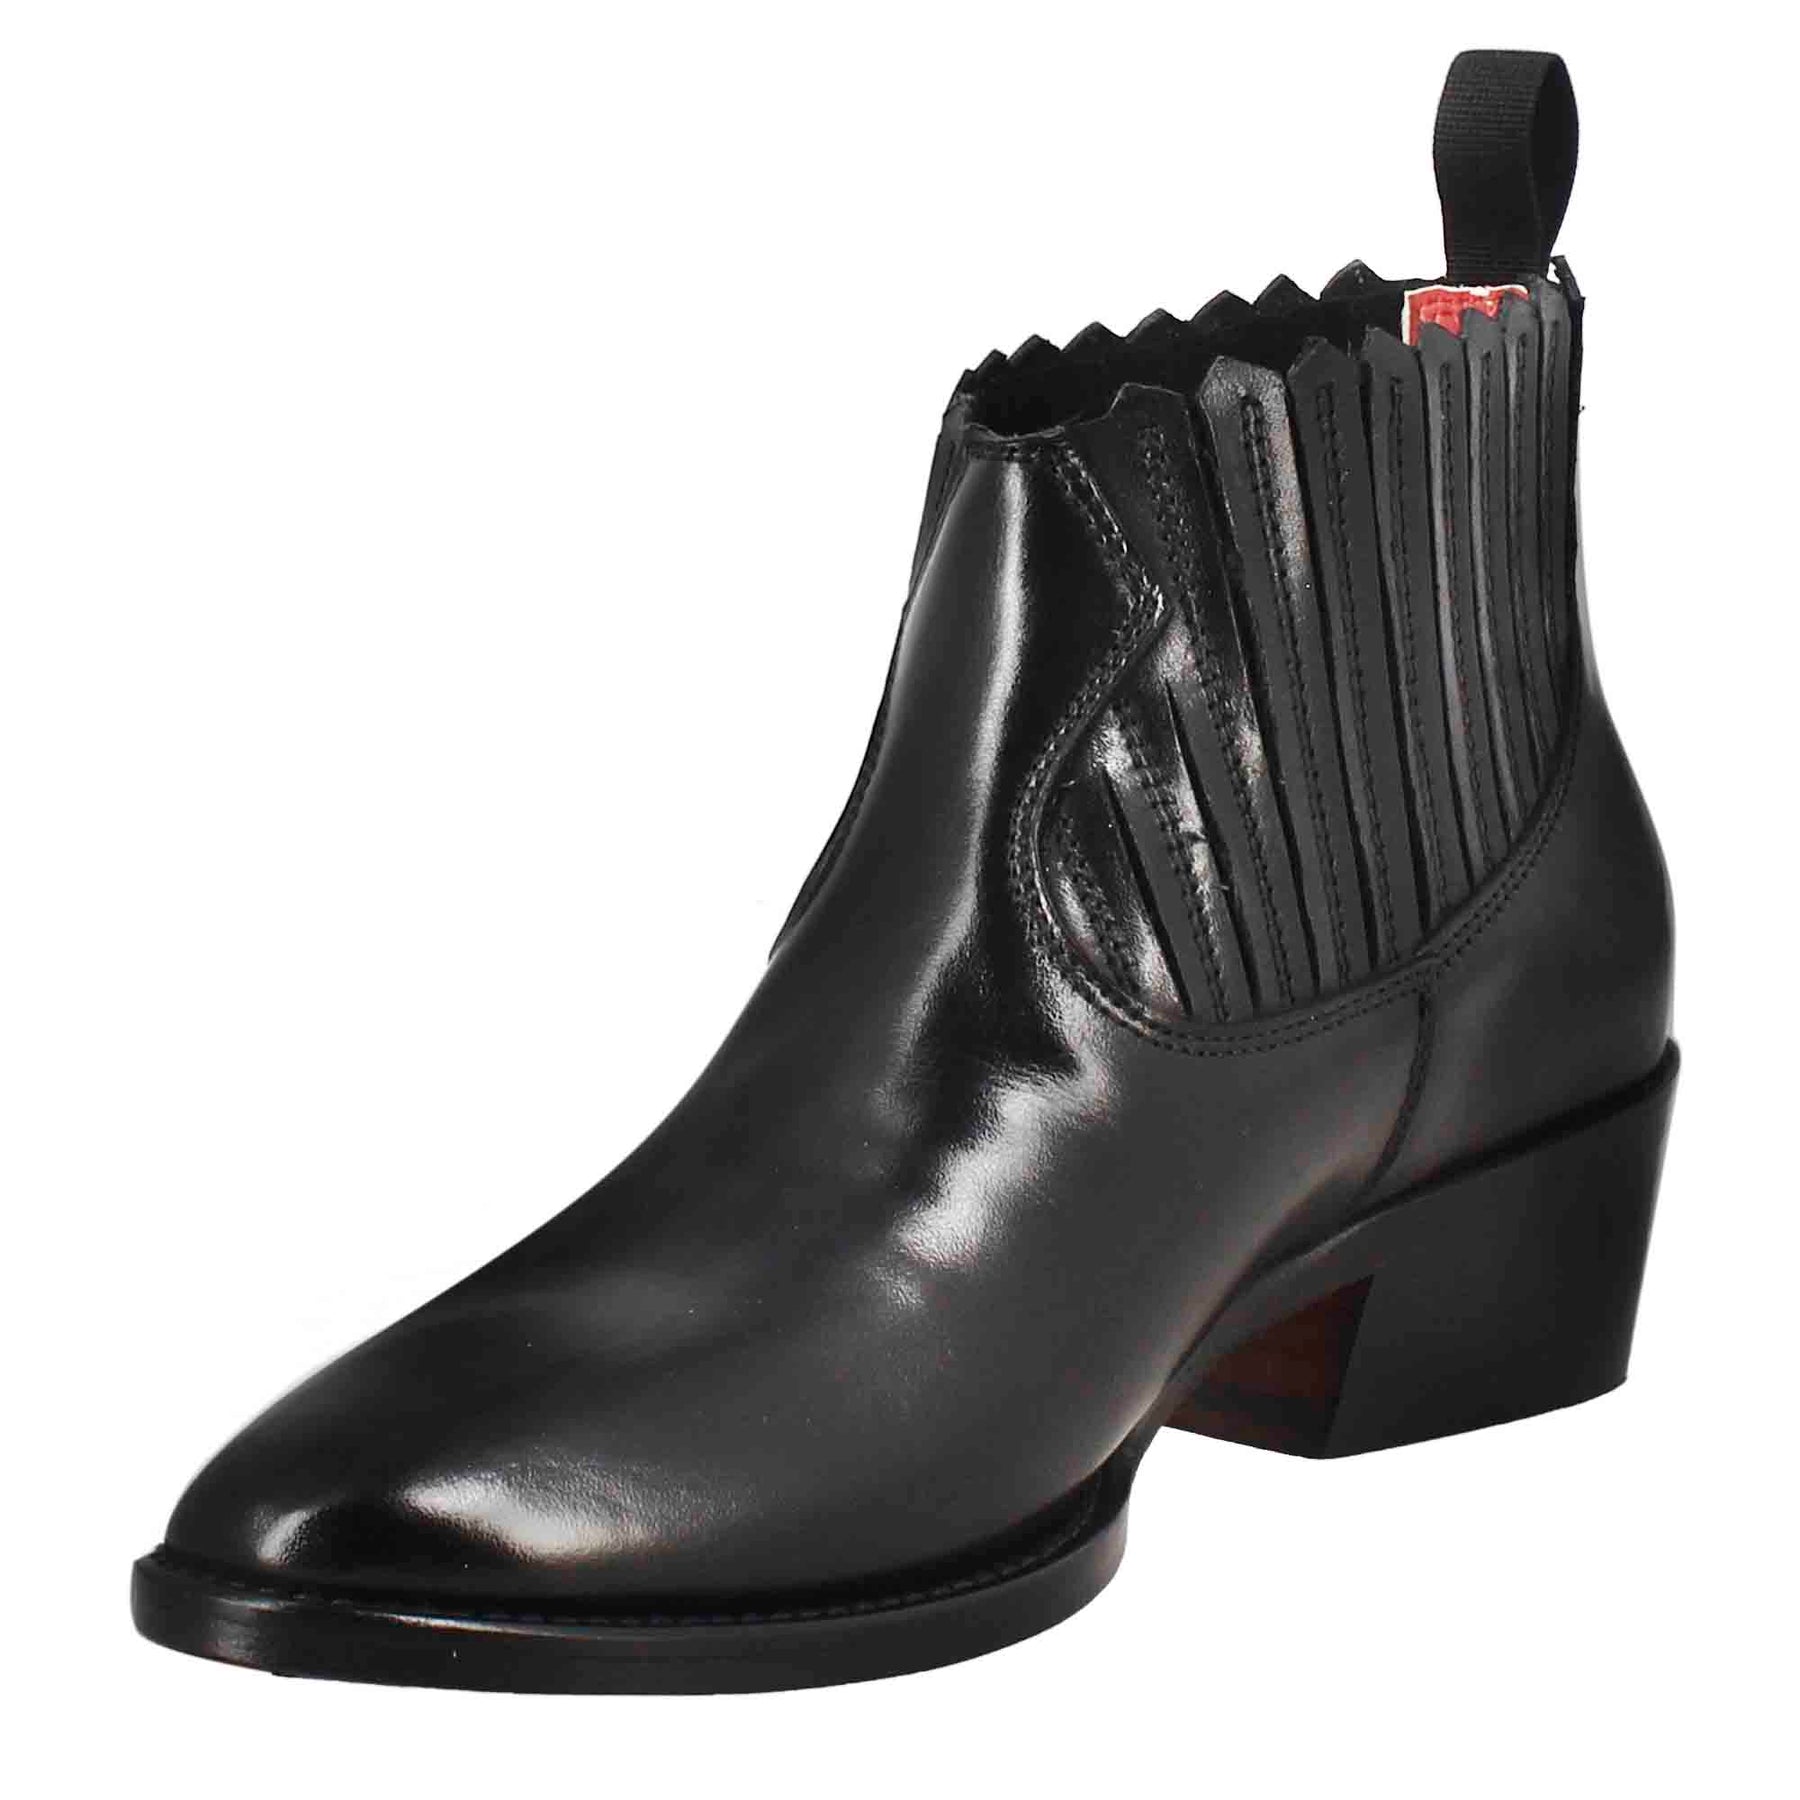 Women's ankle boot with collar cutouts in black leather